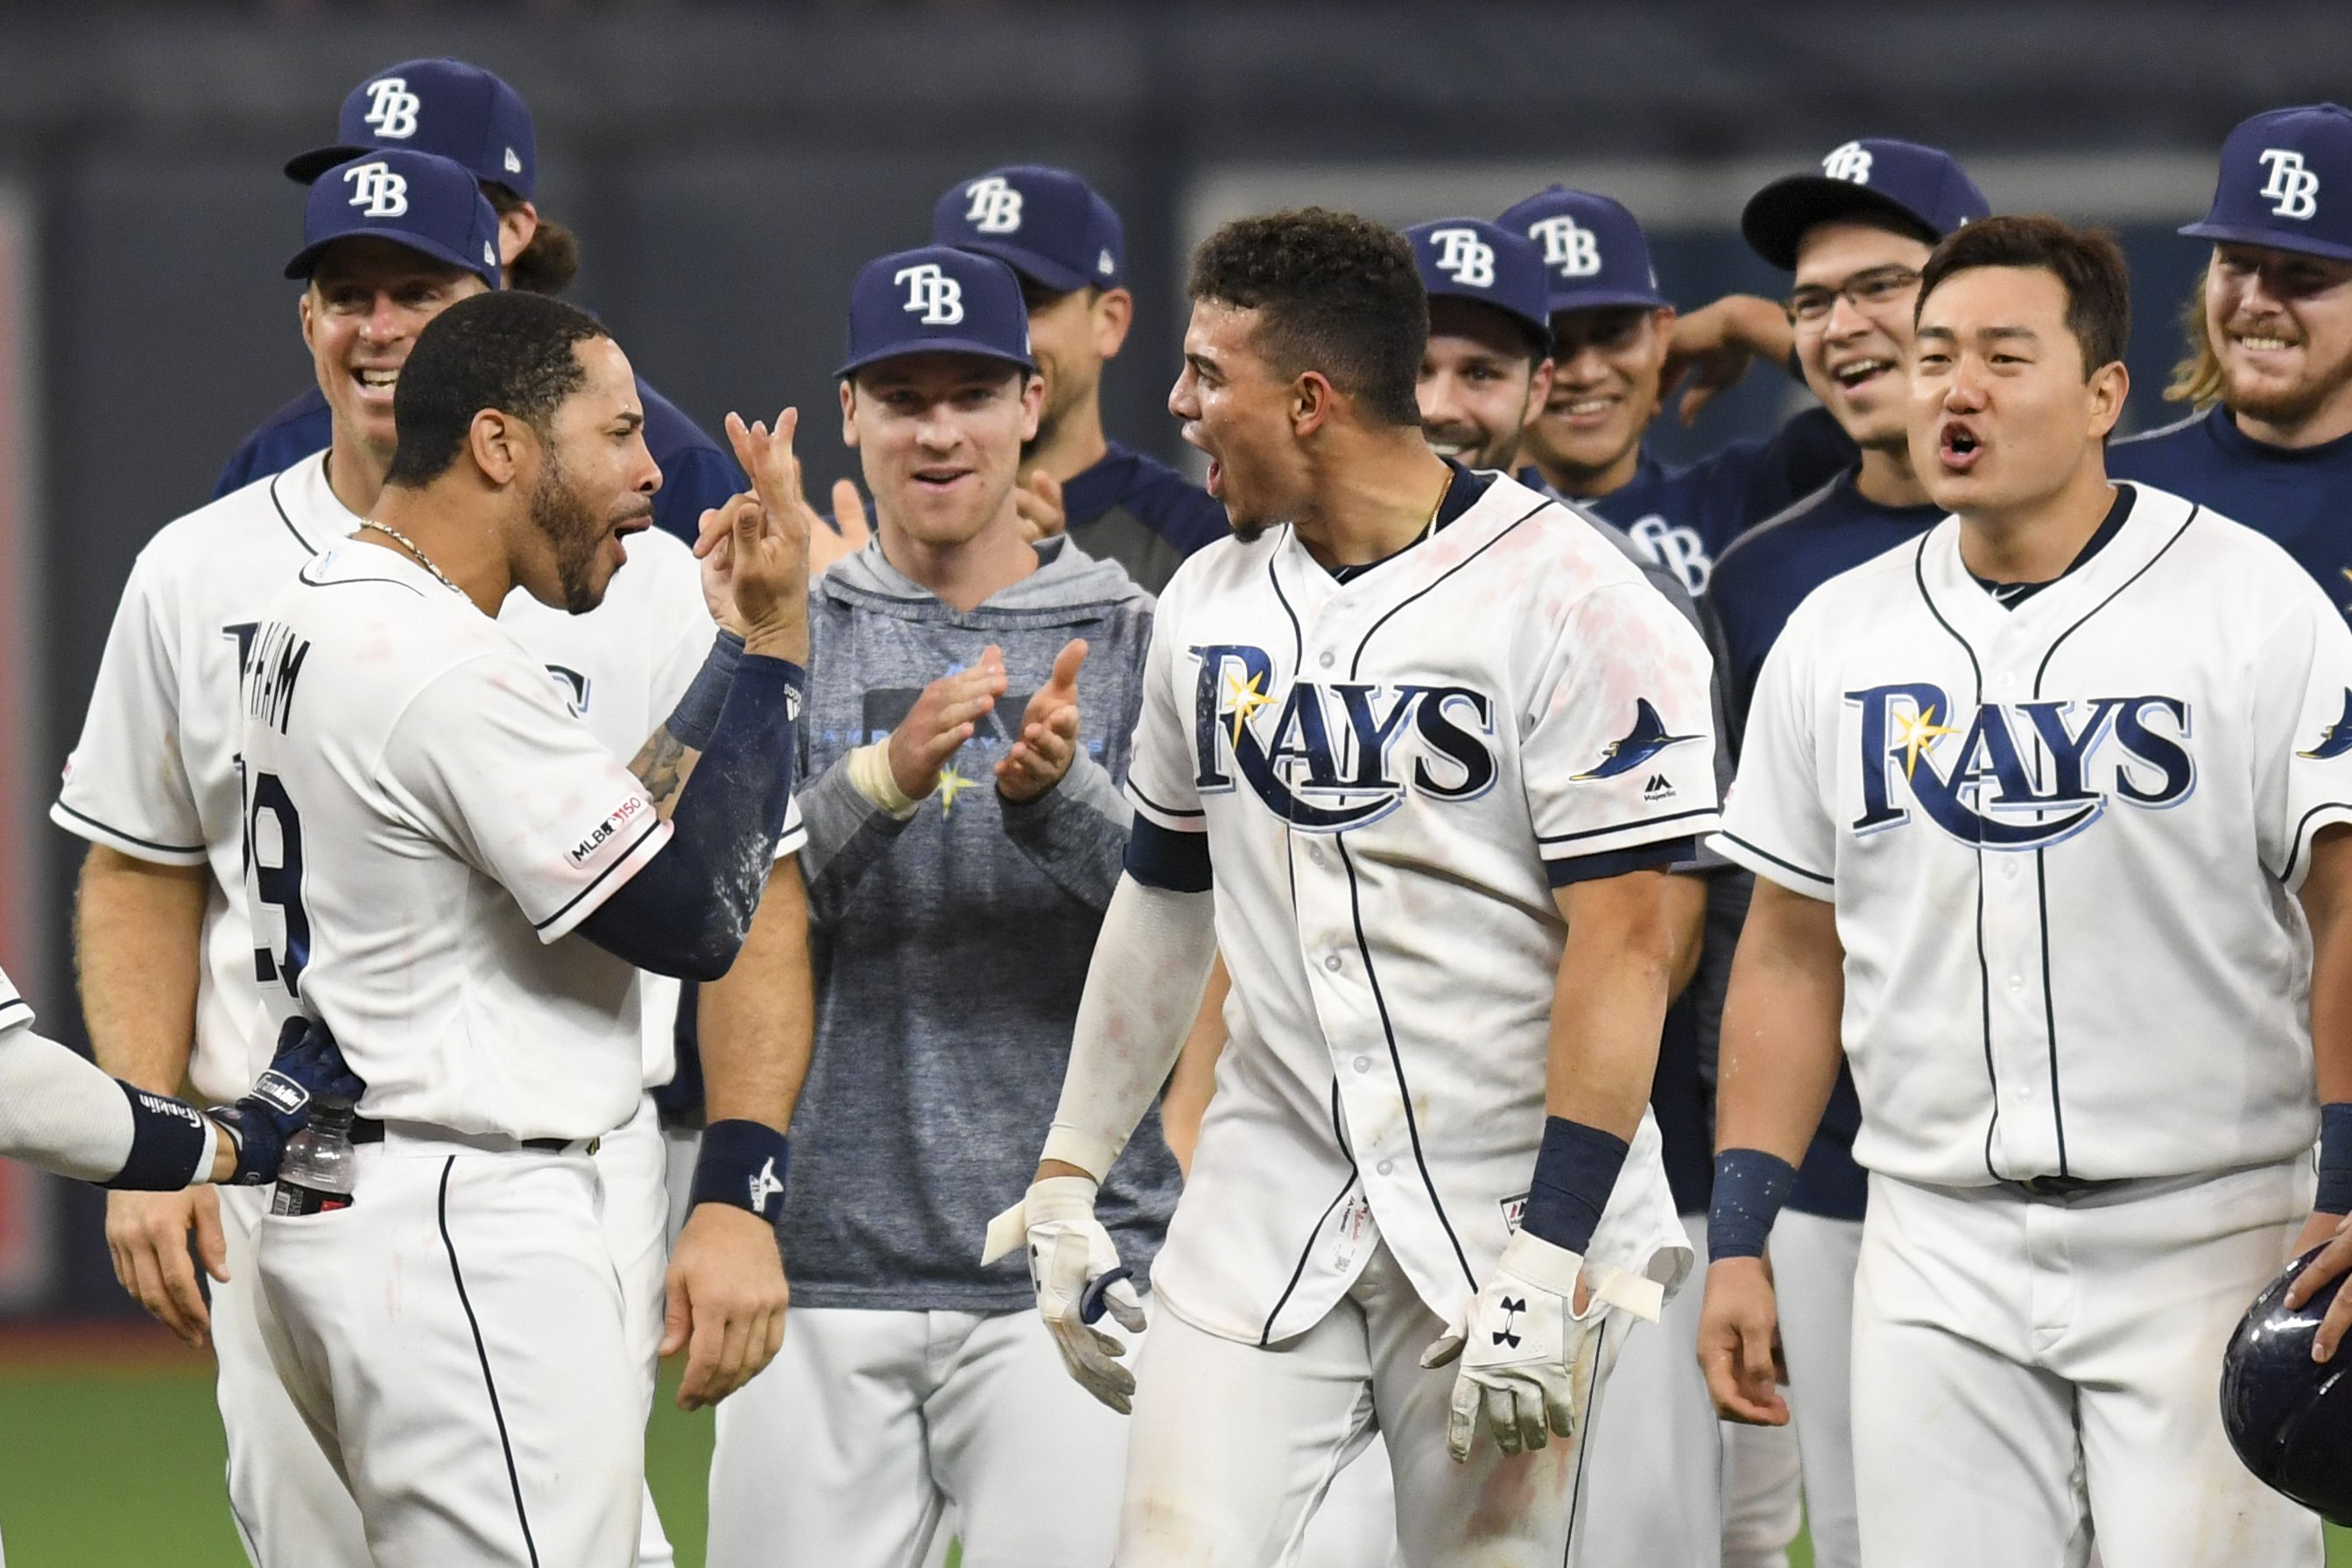 Adames HR gives Rays second win of the day over Blue Jays